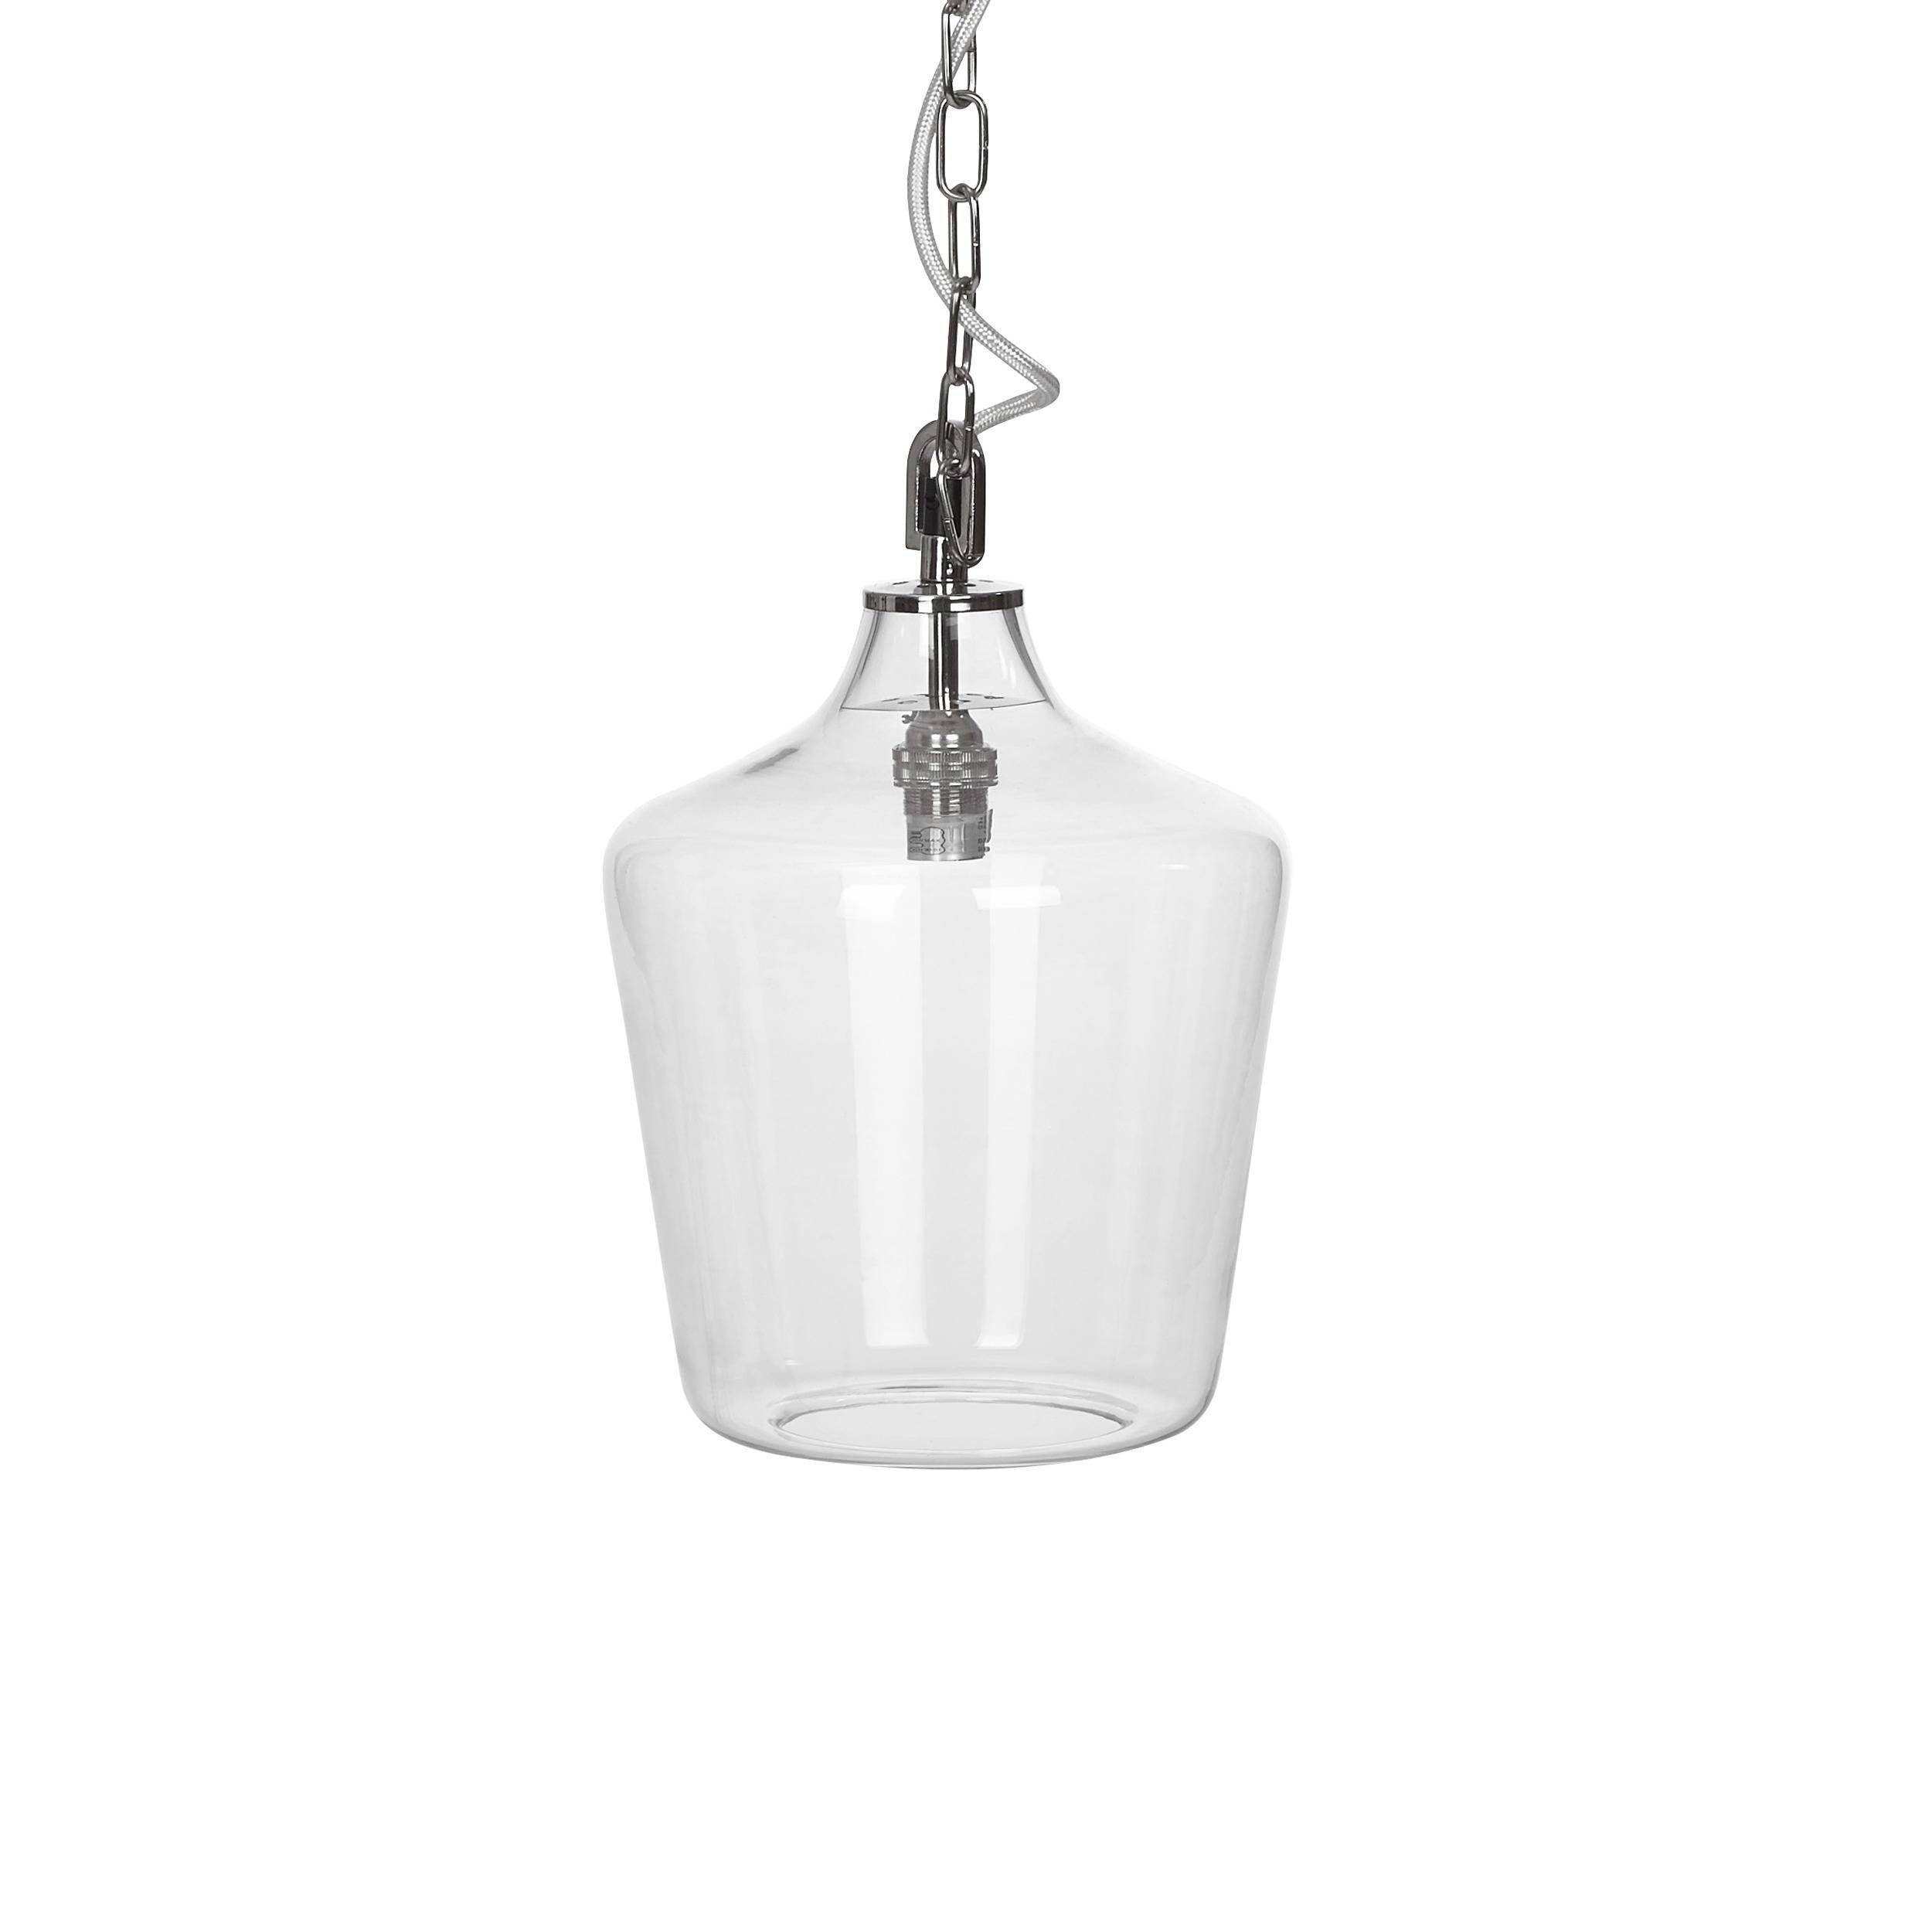 Ockley Glass Bottle Ceiling Pendant Light At Laura Ashley Within Glass Jug Pendant Lights (View 13 of 15)